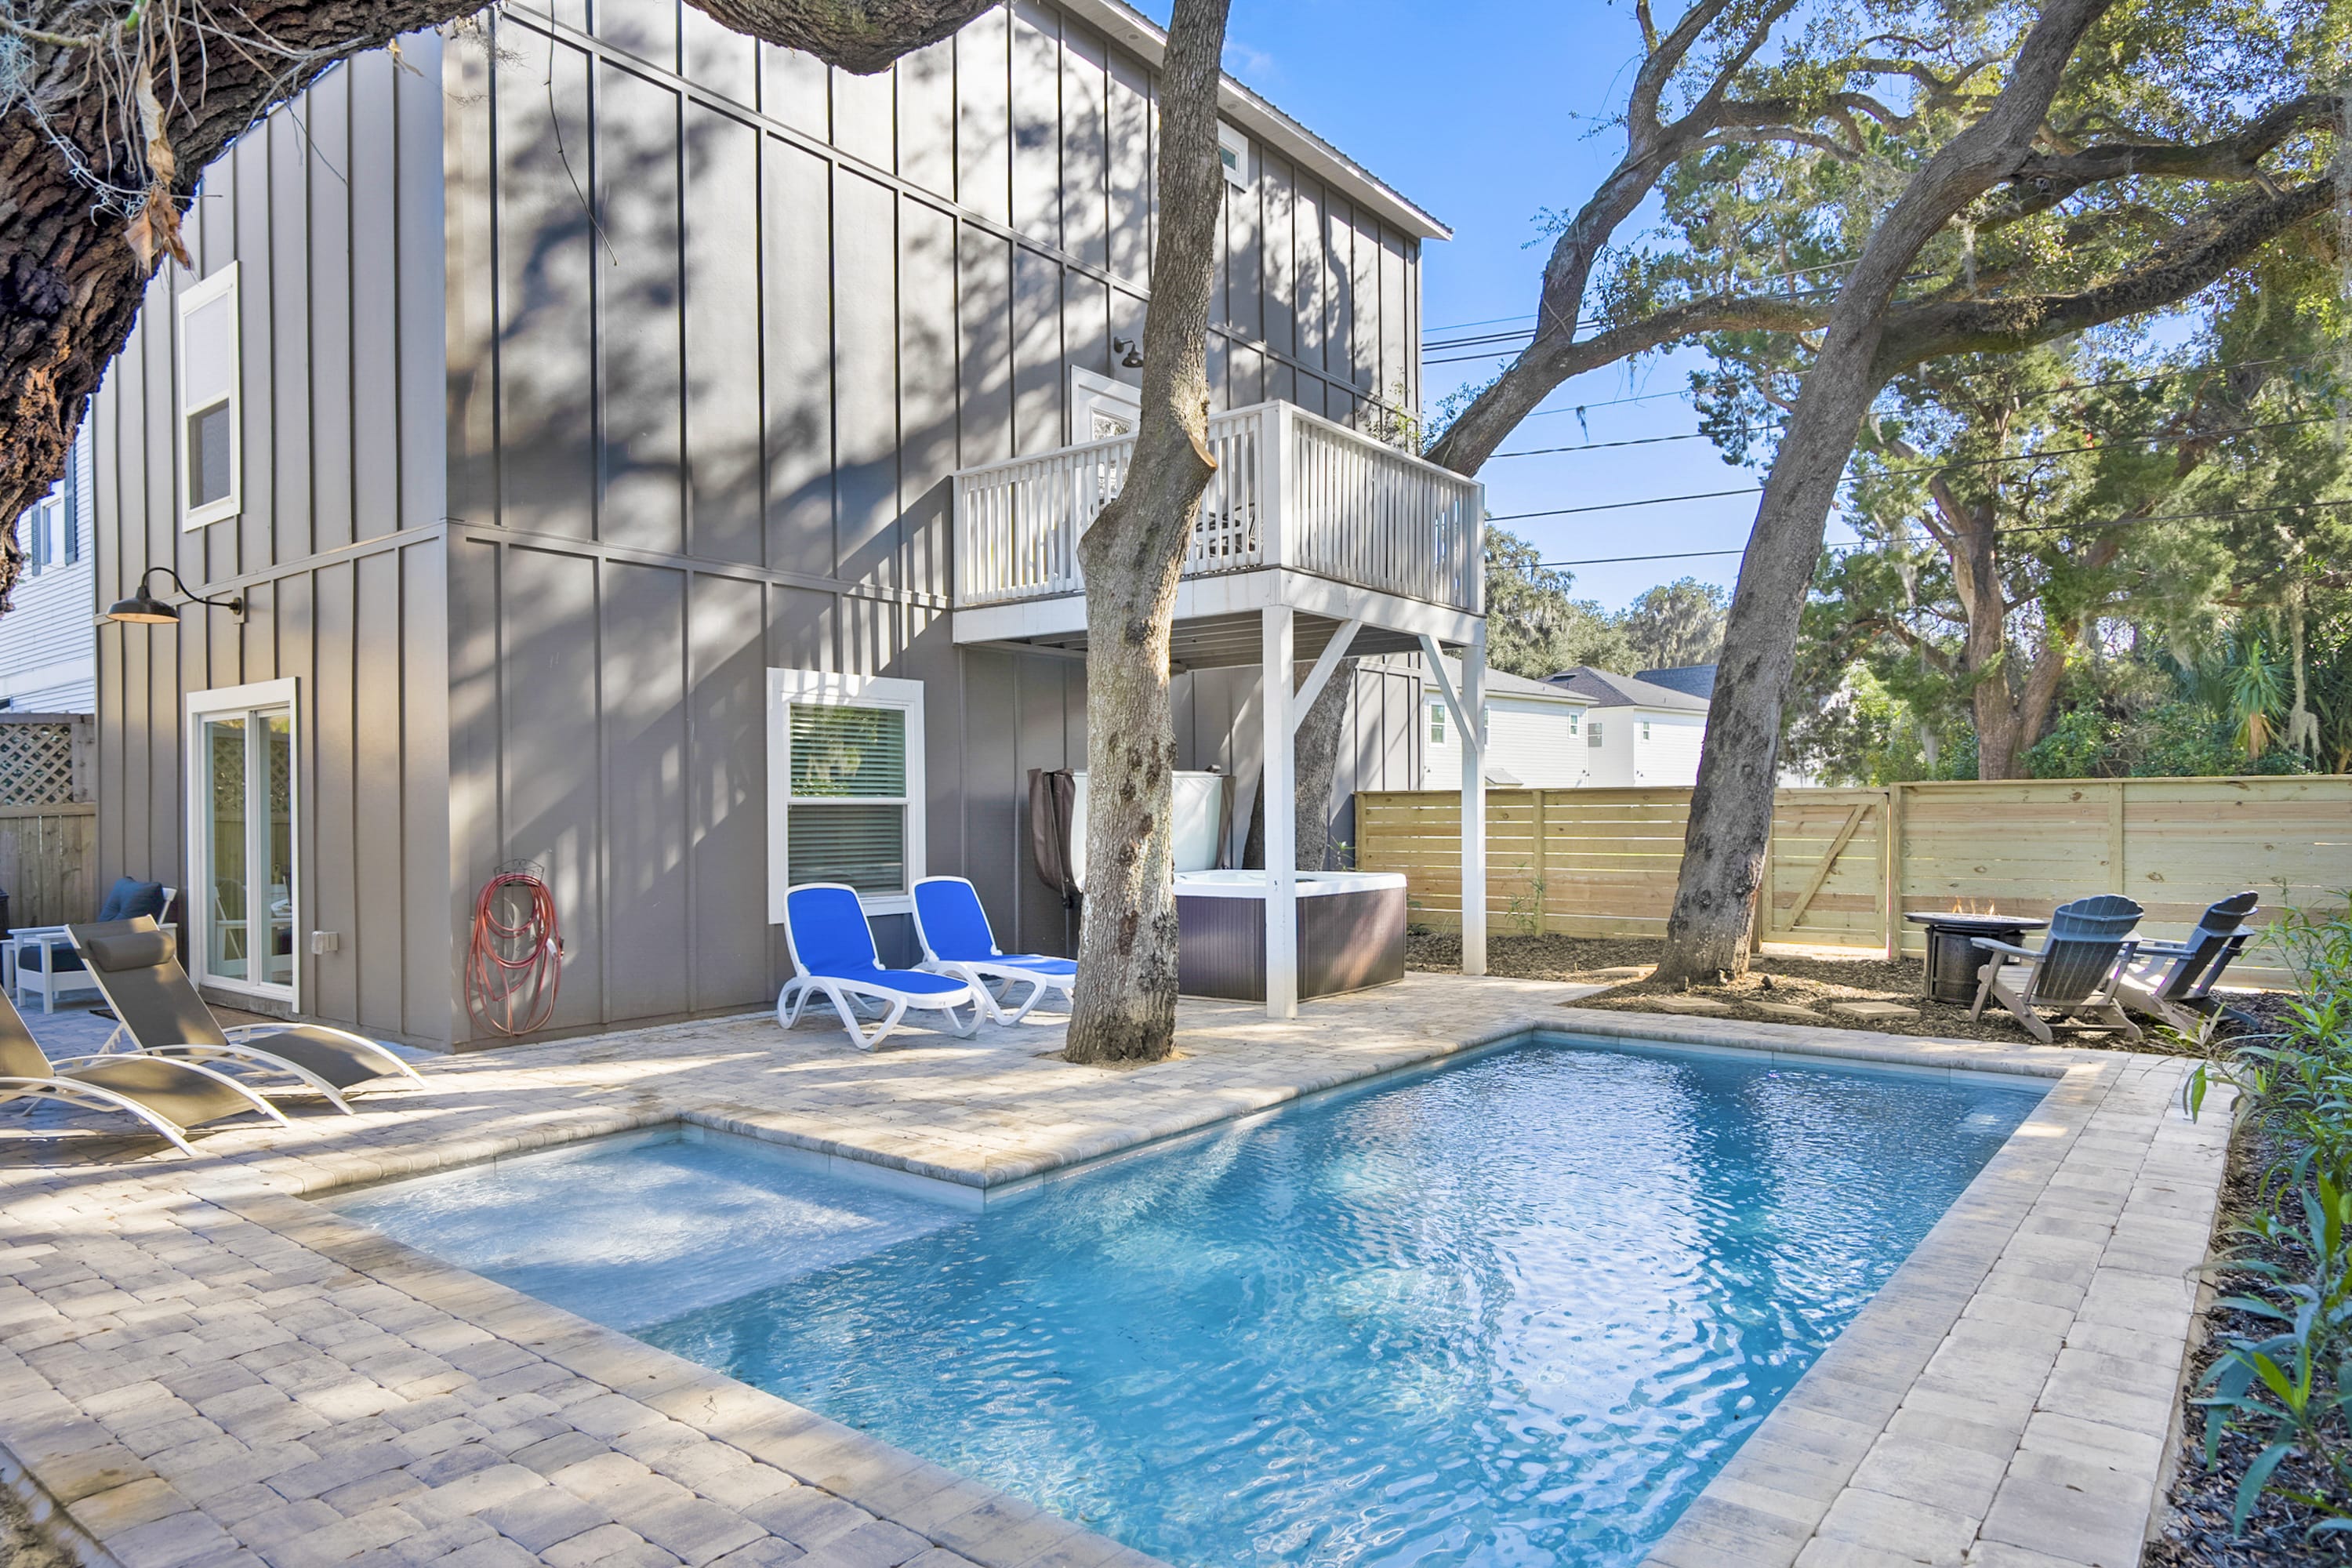 Property Image 1 - DT St Aug Pool Home + Spa, by Beach, Add Golf Cart